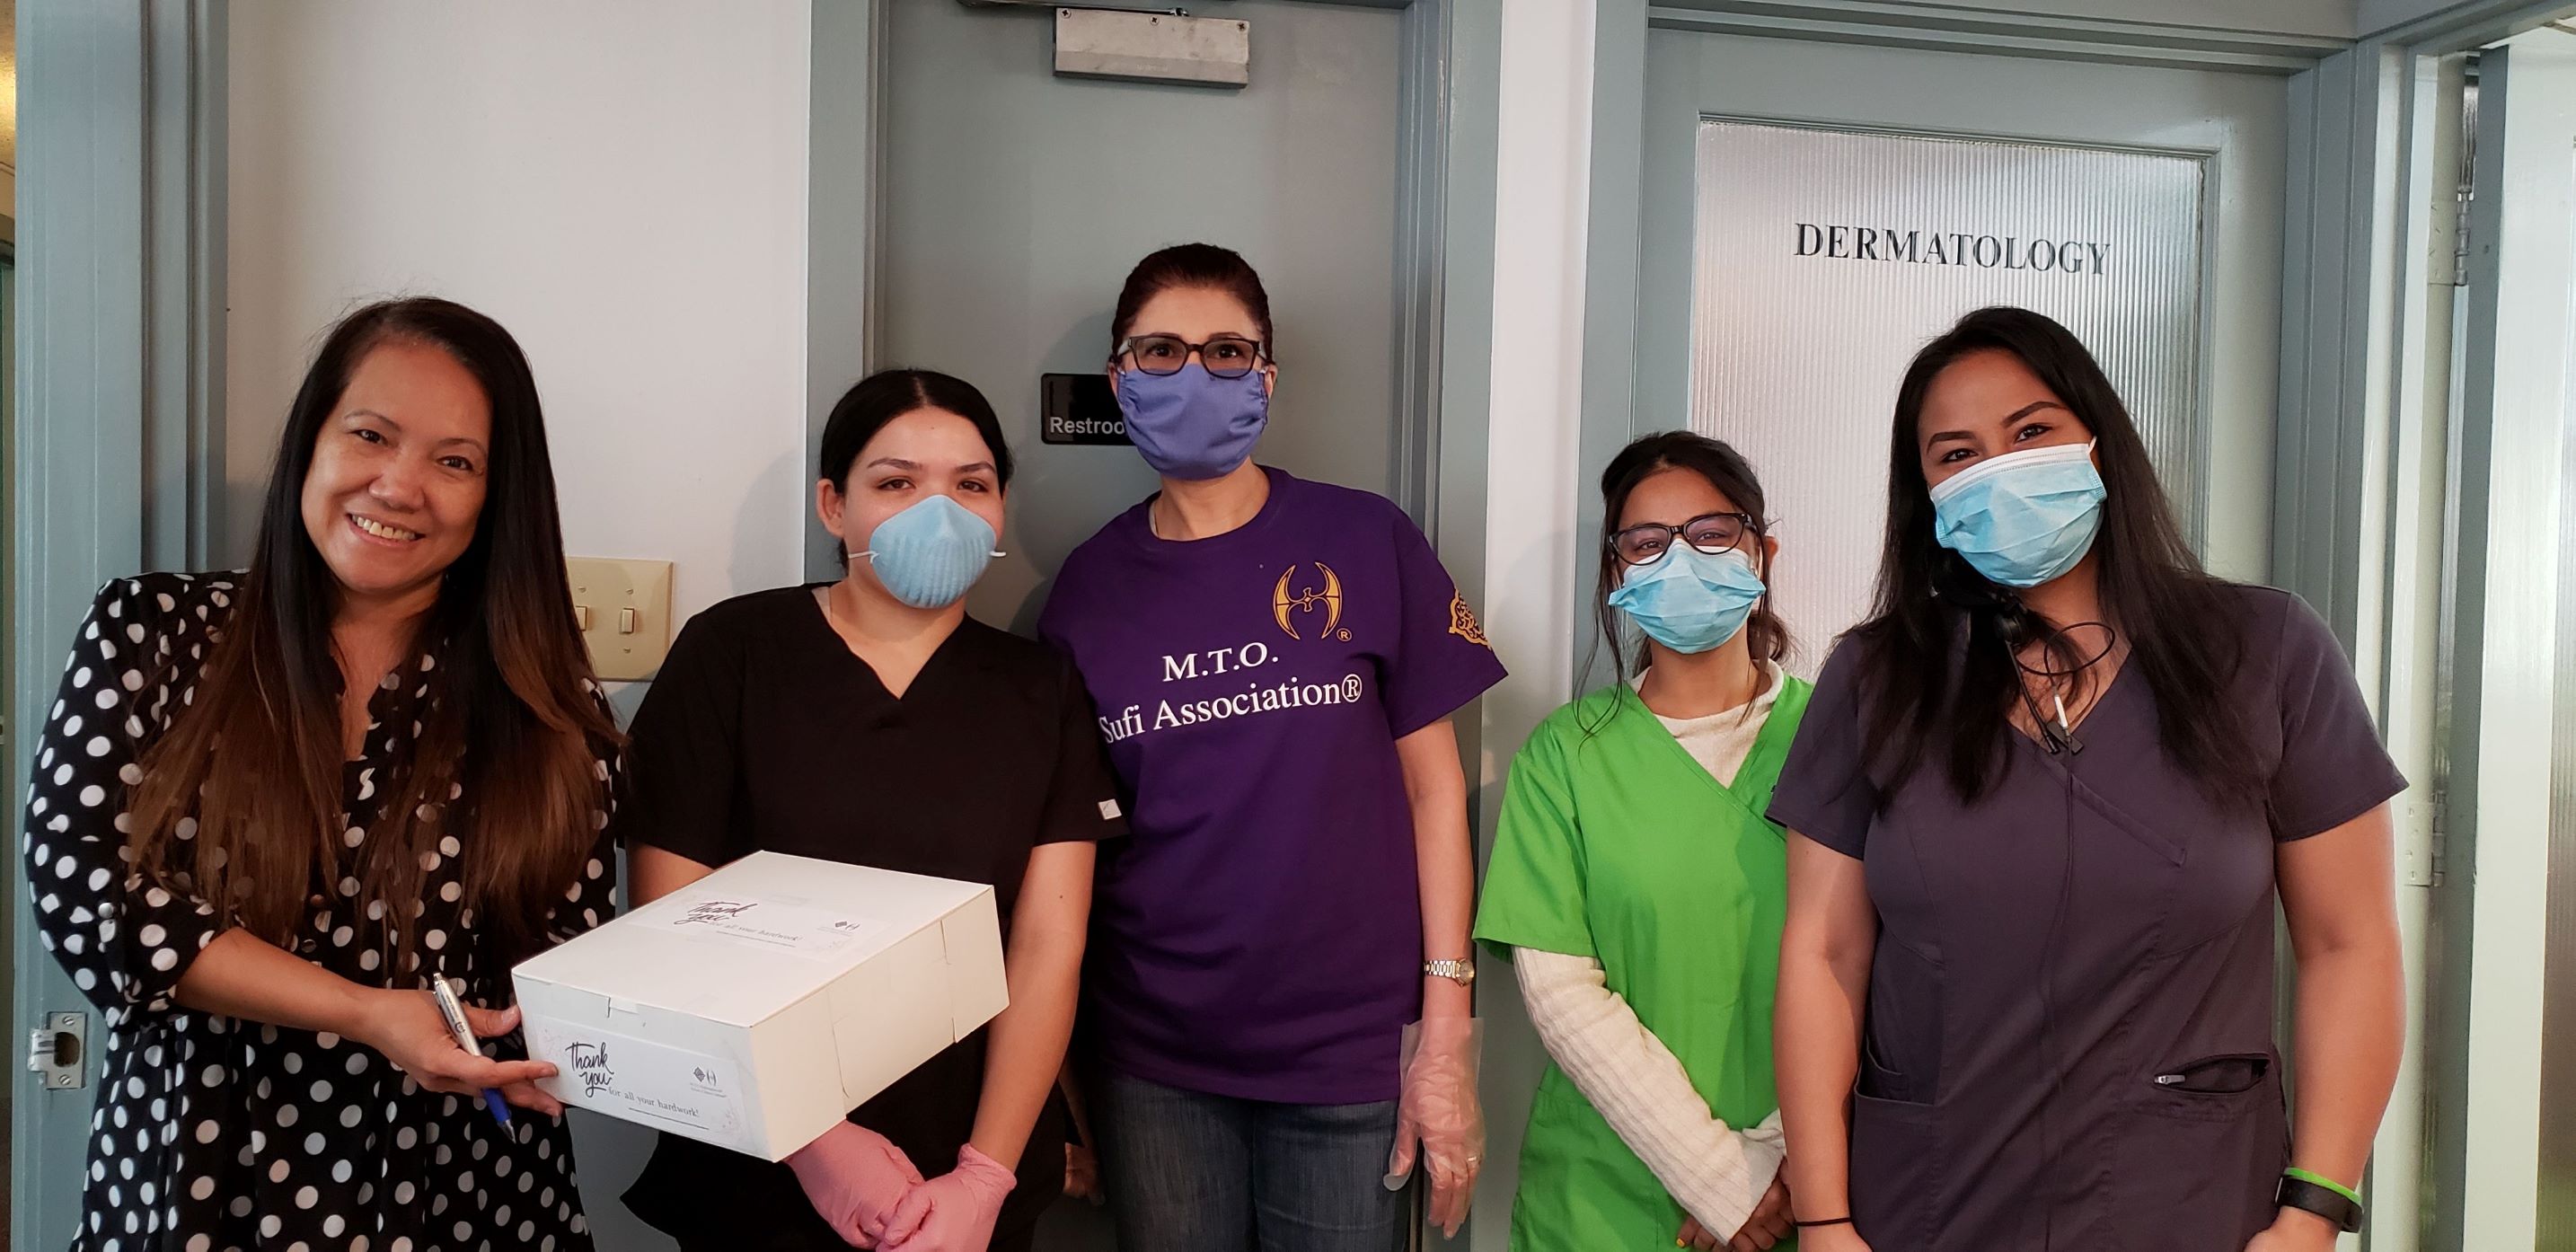 M.T.O. Berkeley Provides Sweets and Cookies to Local Dermatologists 